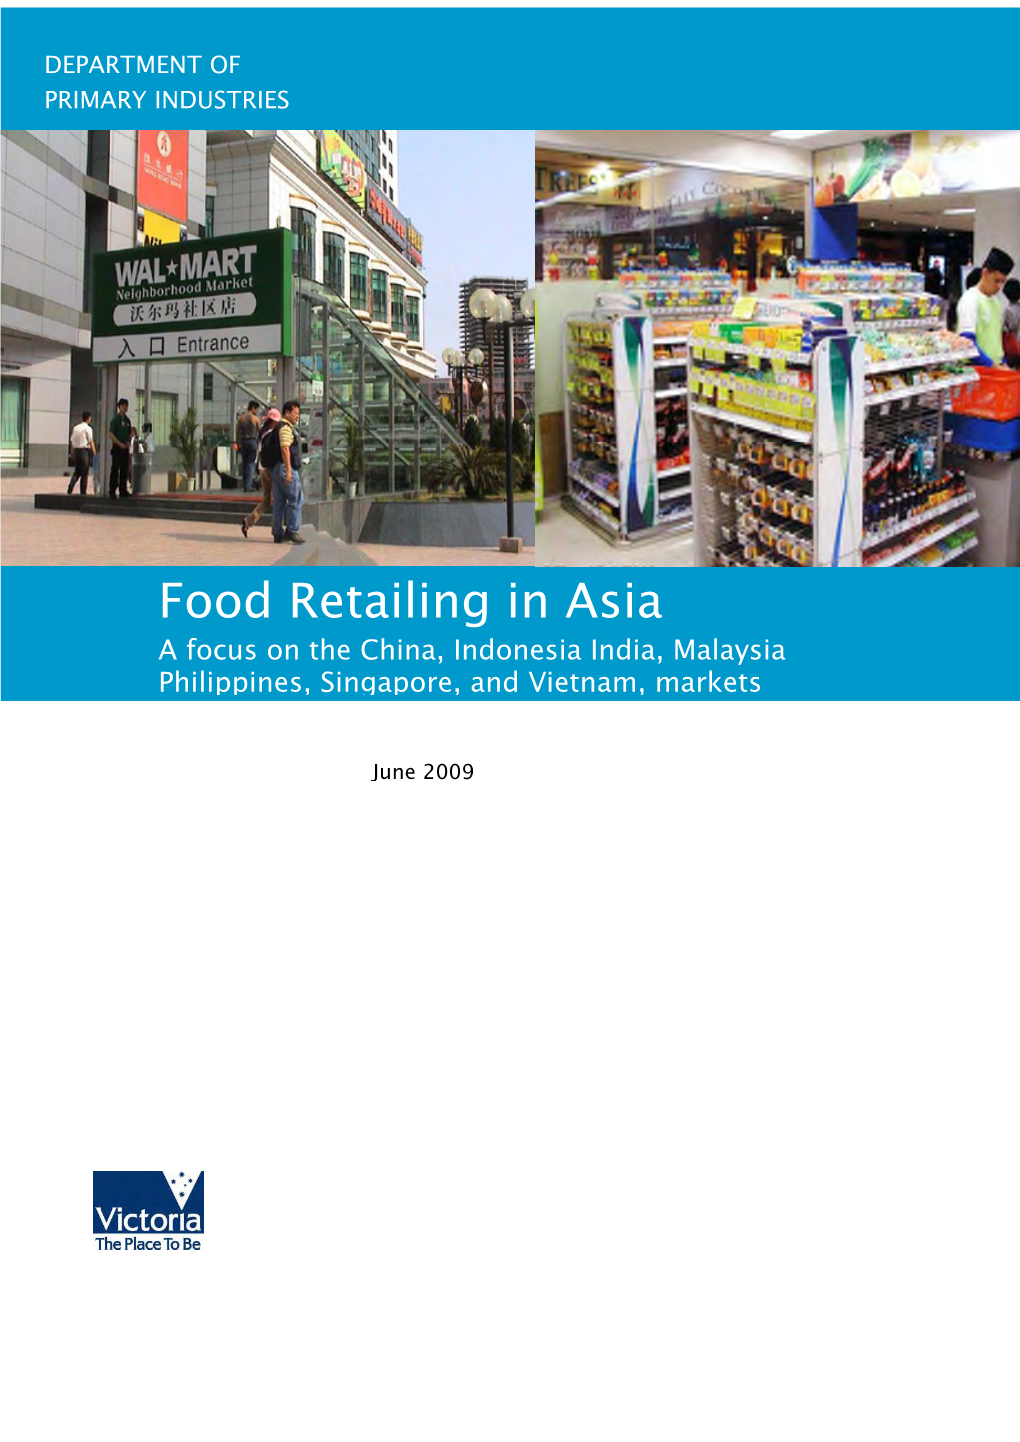 Food Retailing in Asia a Focus on the China, Indonesia India, Malaysia Philippines, Singapore, and Vietnam, Markets